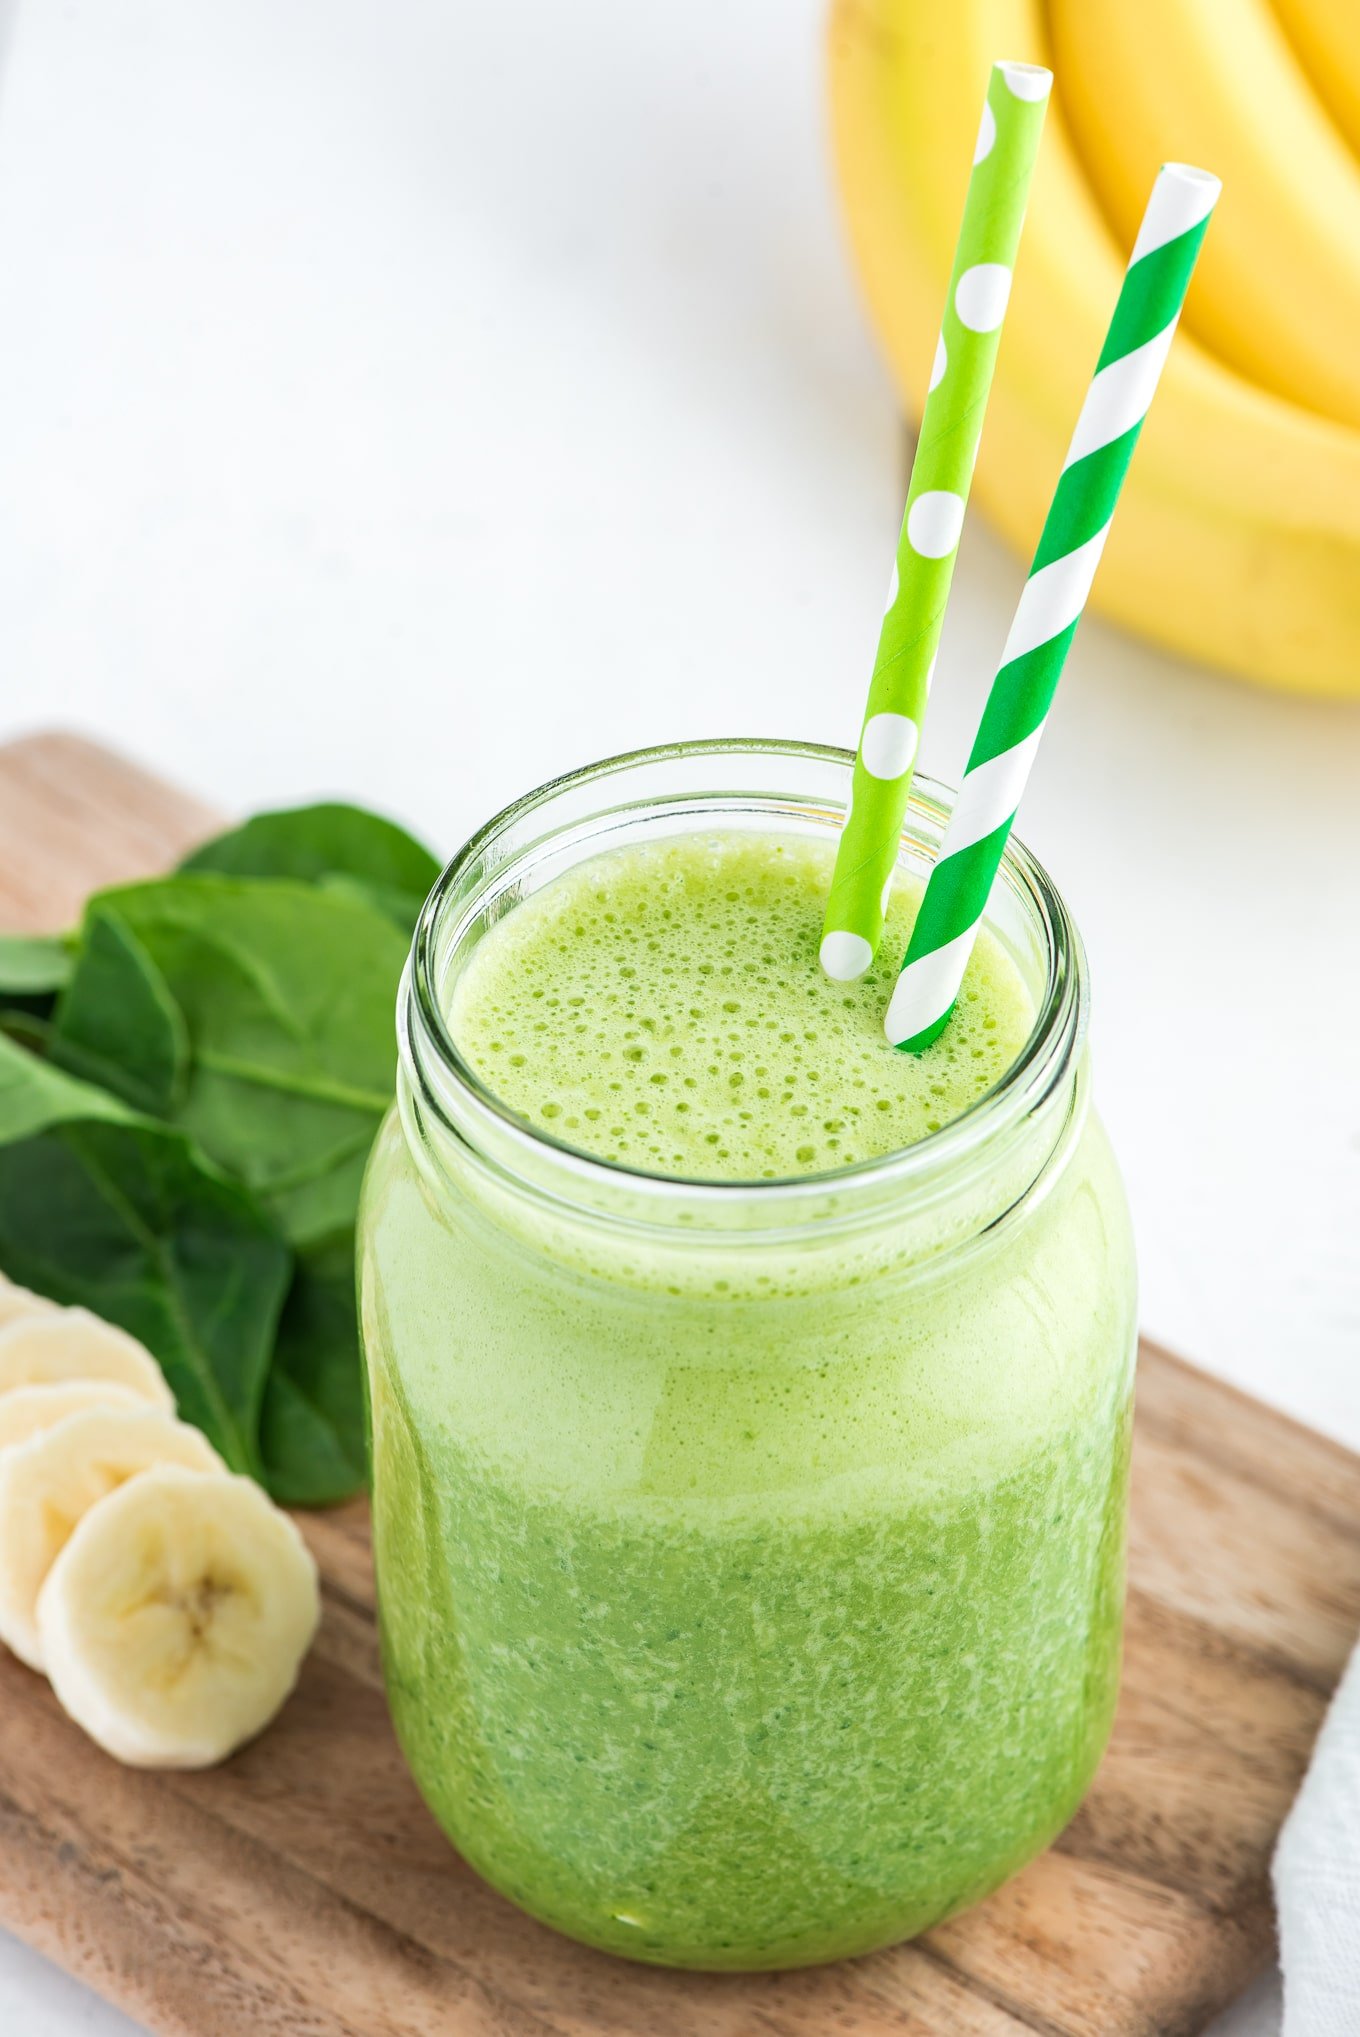 Spinach smoothie in a glass with two straws.